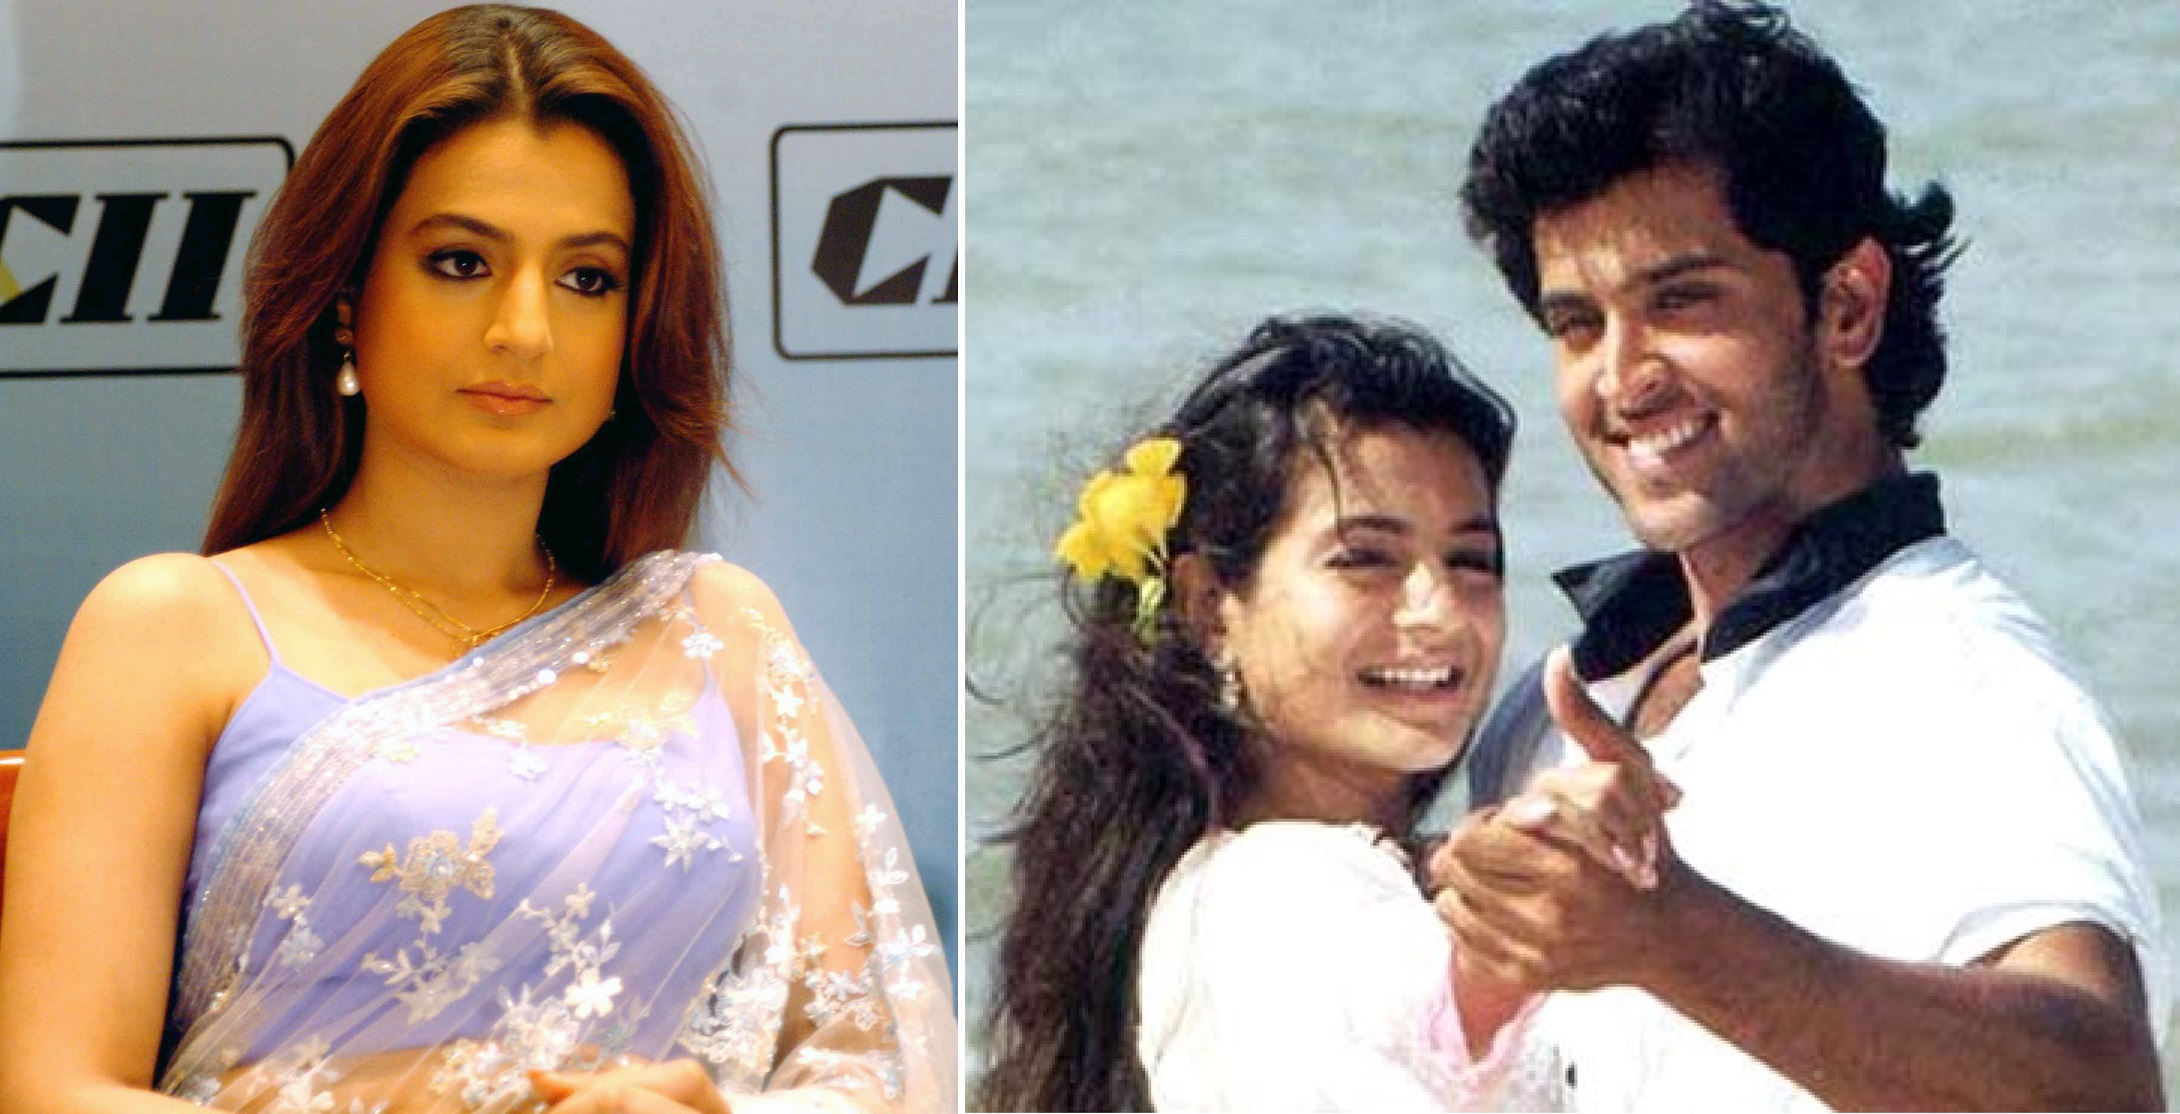 People Thought Ameesha Patel Was “Bratty”, As Hrithik Came In A Maruti & She In Mercedes, During Kaho Na… Pyaar Hai Shooting